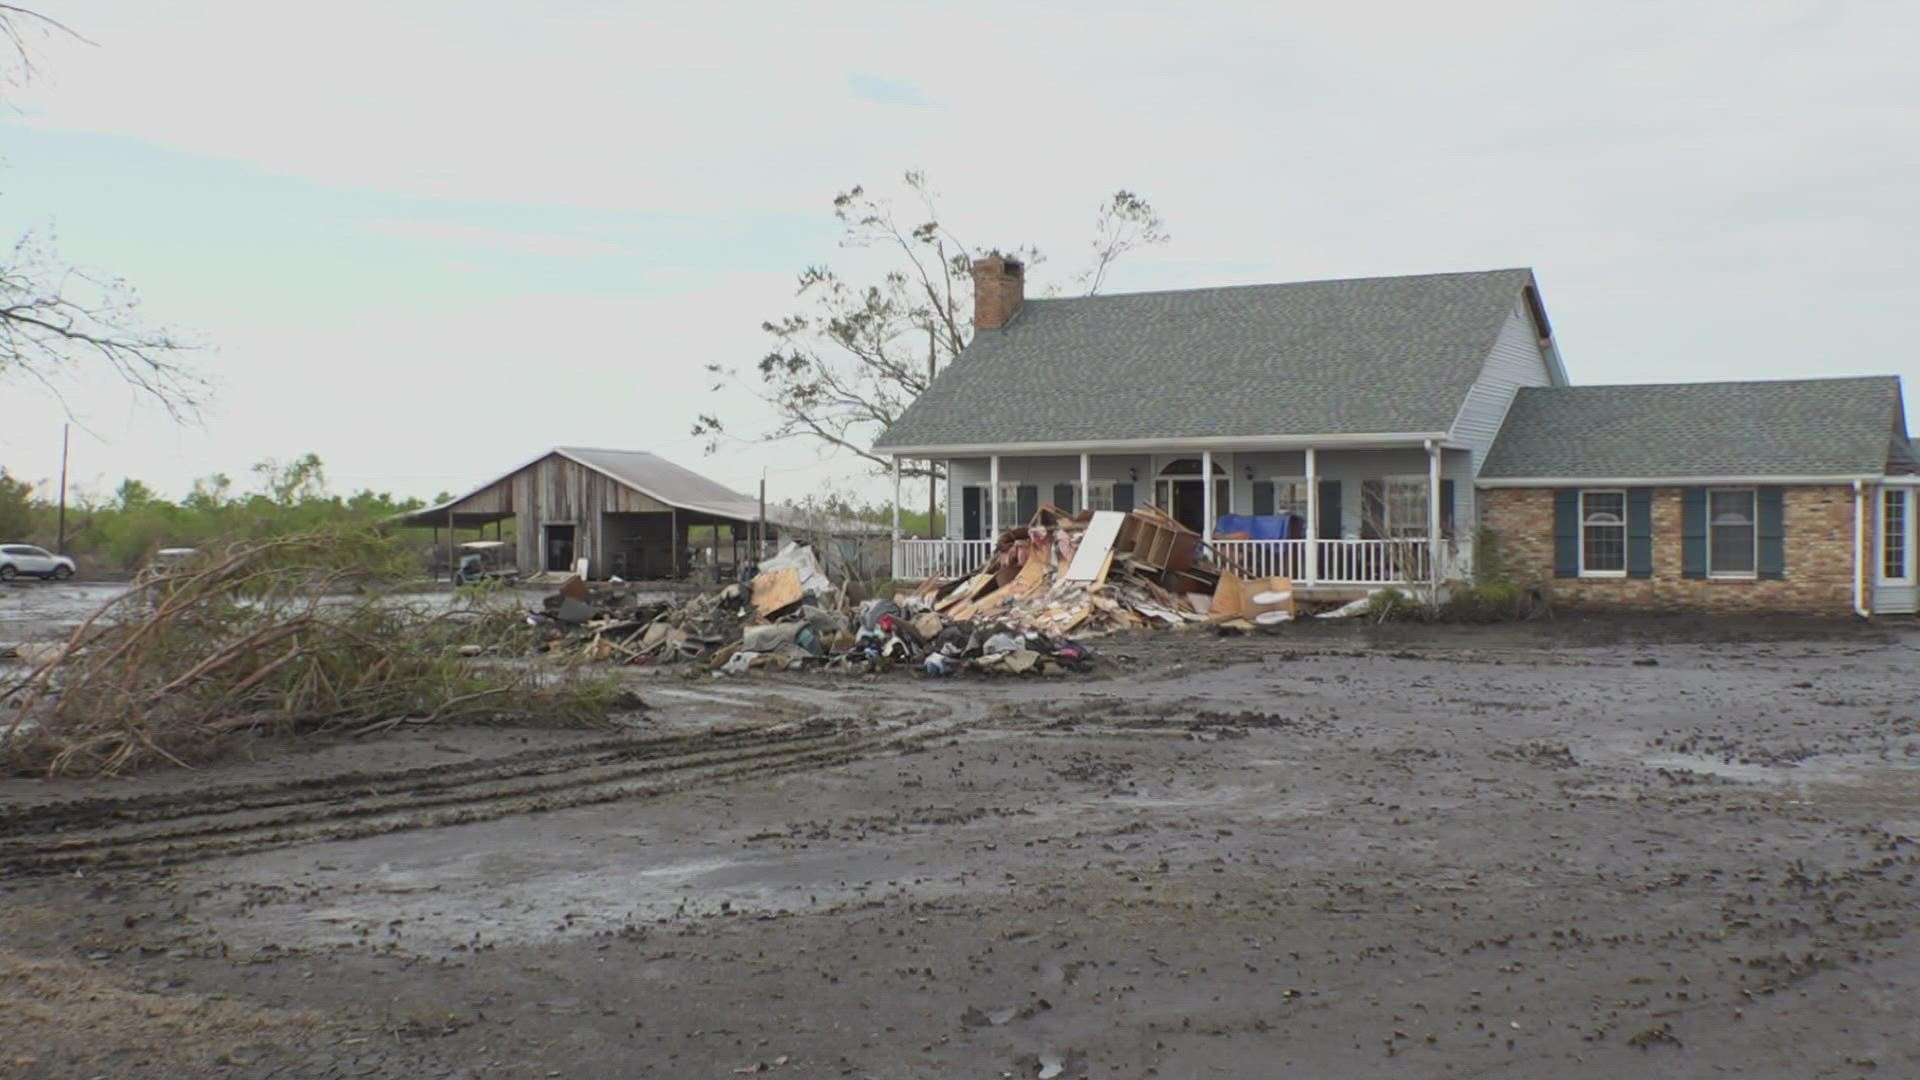 It’s been more than four weeks since Hurricane Ida decimated much of south Louisiana, and thousands are still without homes and basic living necessities.